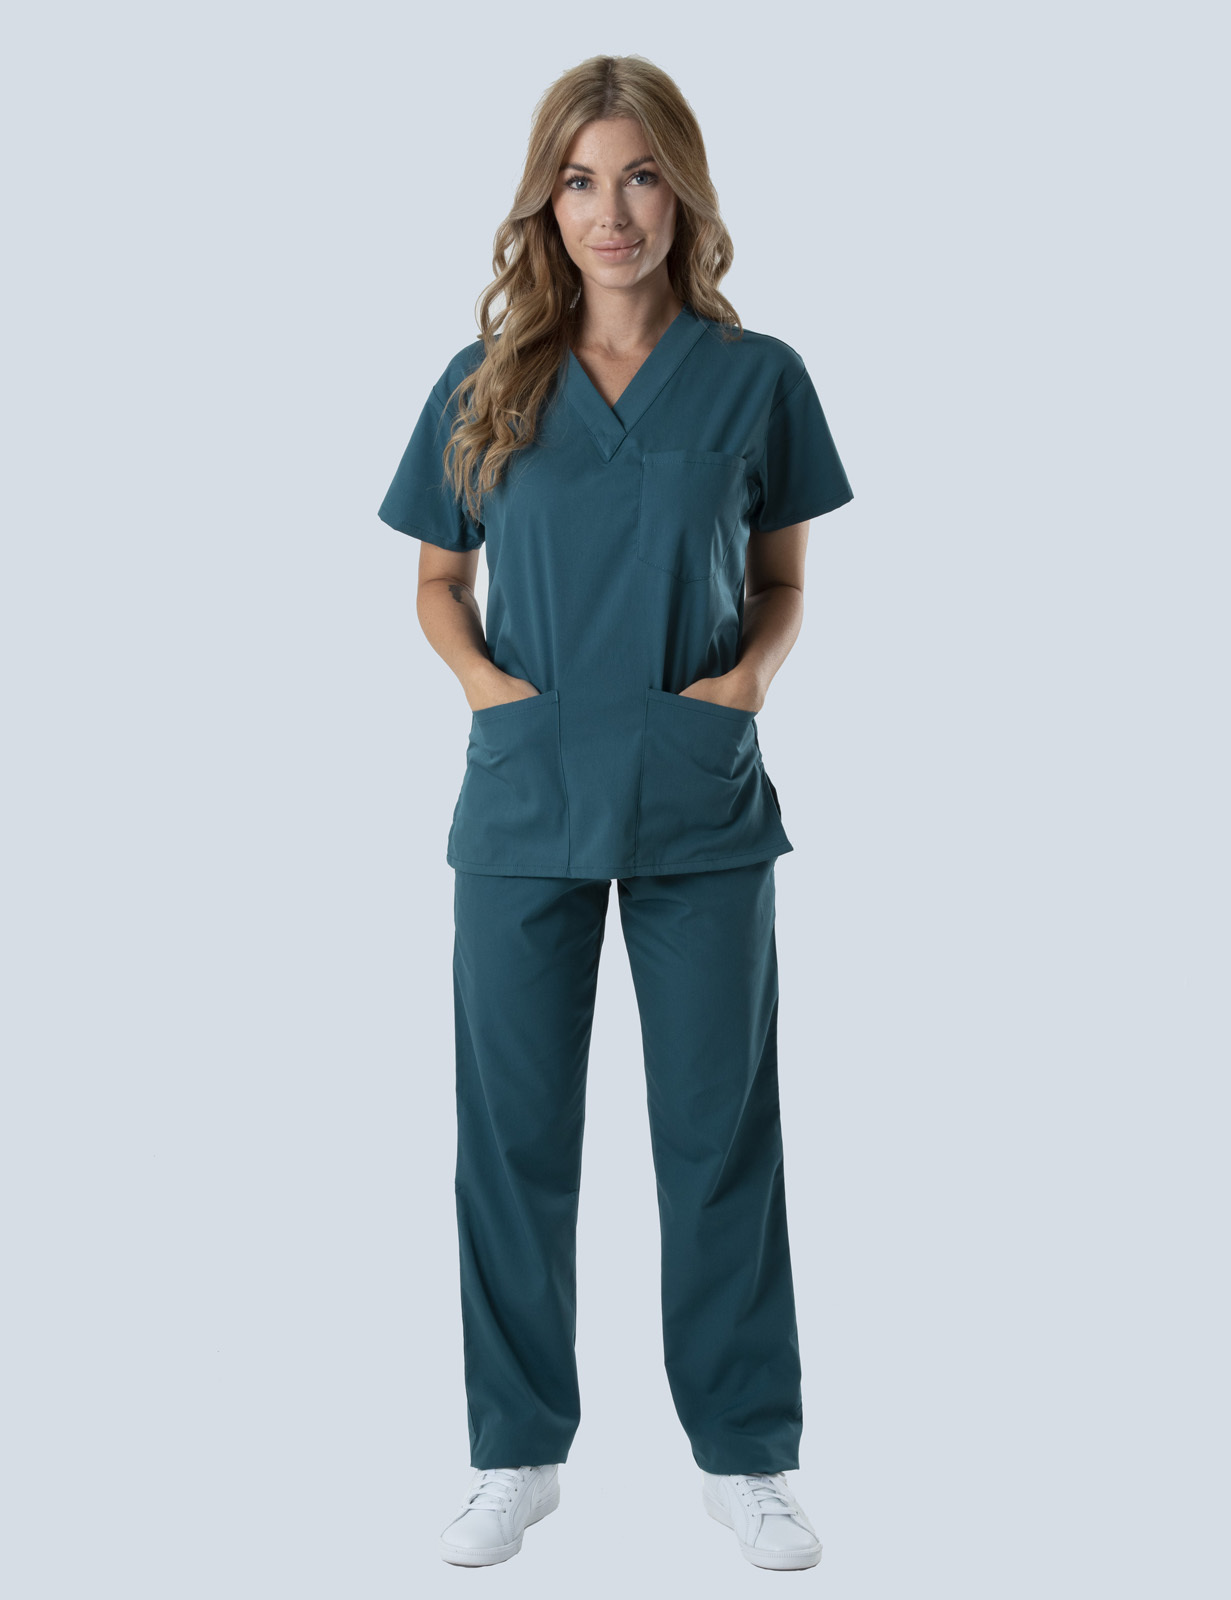 Southern Animal Health Uniform Top Only Bundle (4 Pocket Top in Caribbean incl Logos)